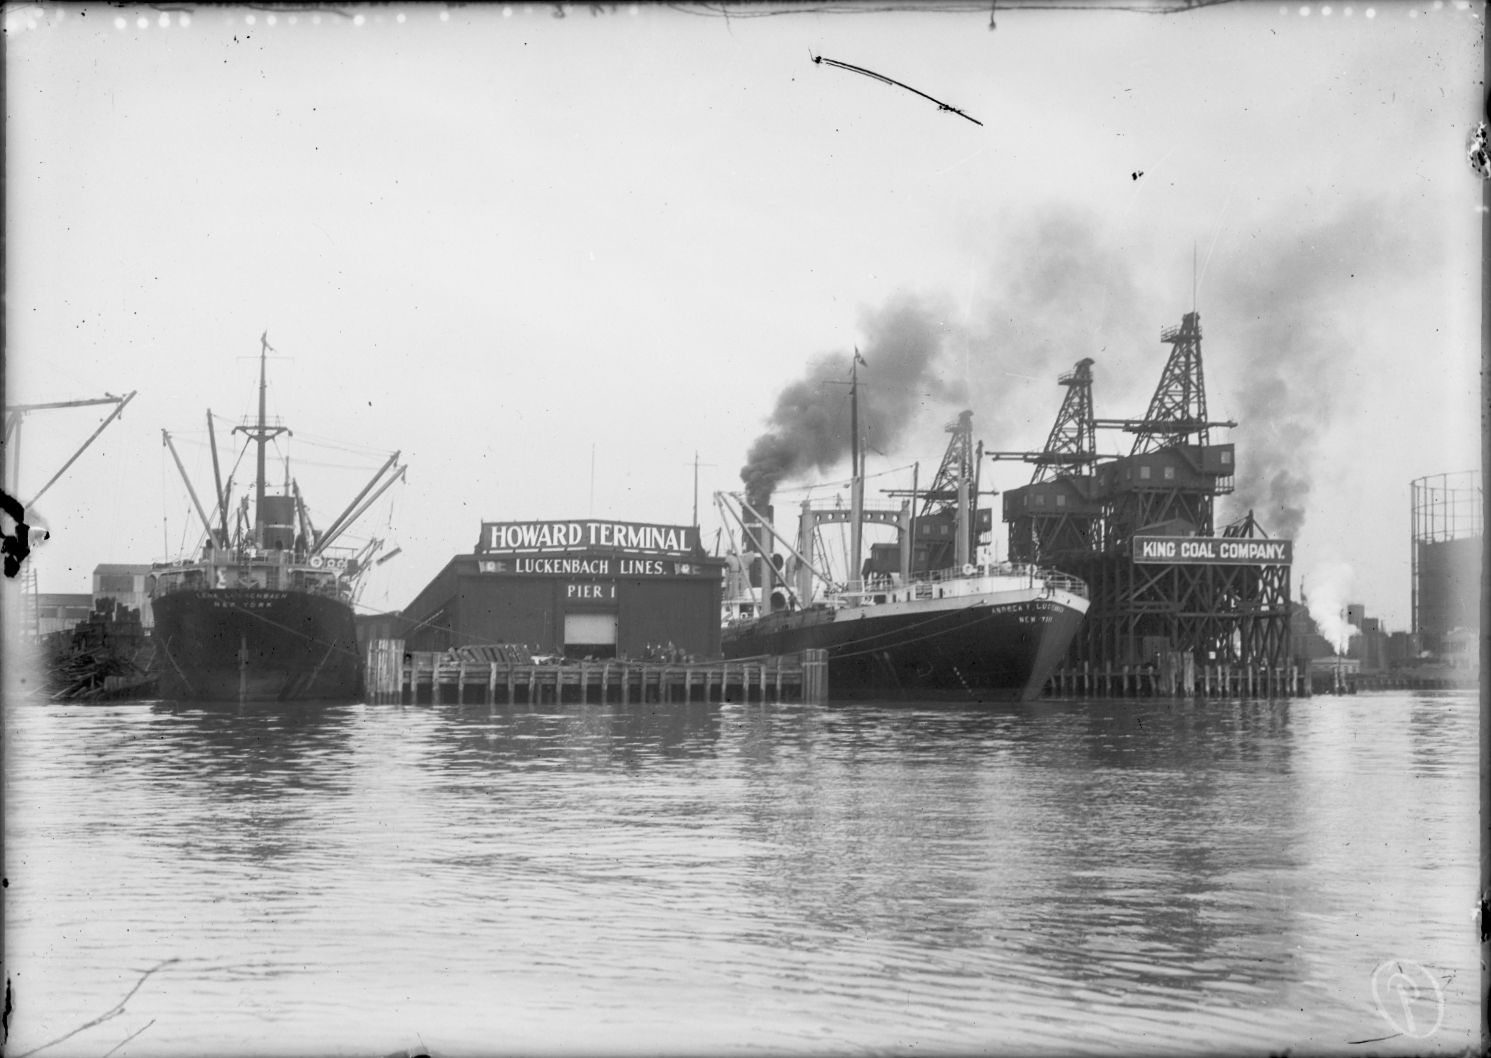 Howard Terminal from the water, 1920s